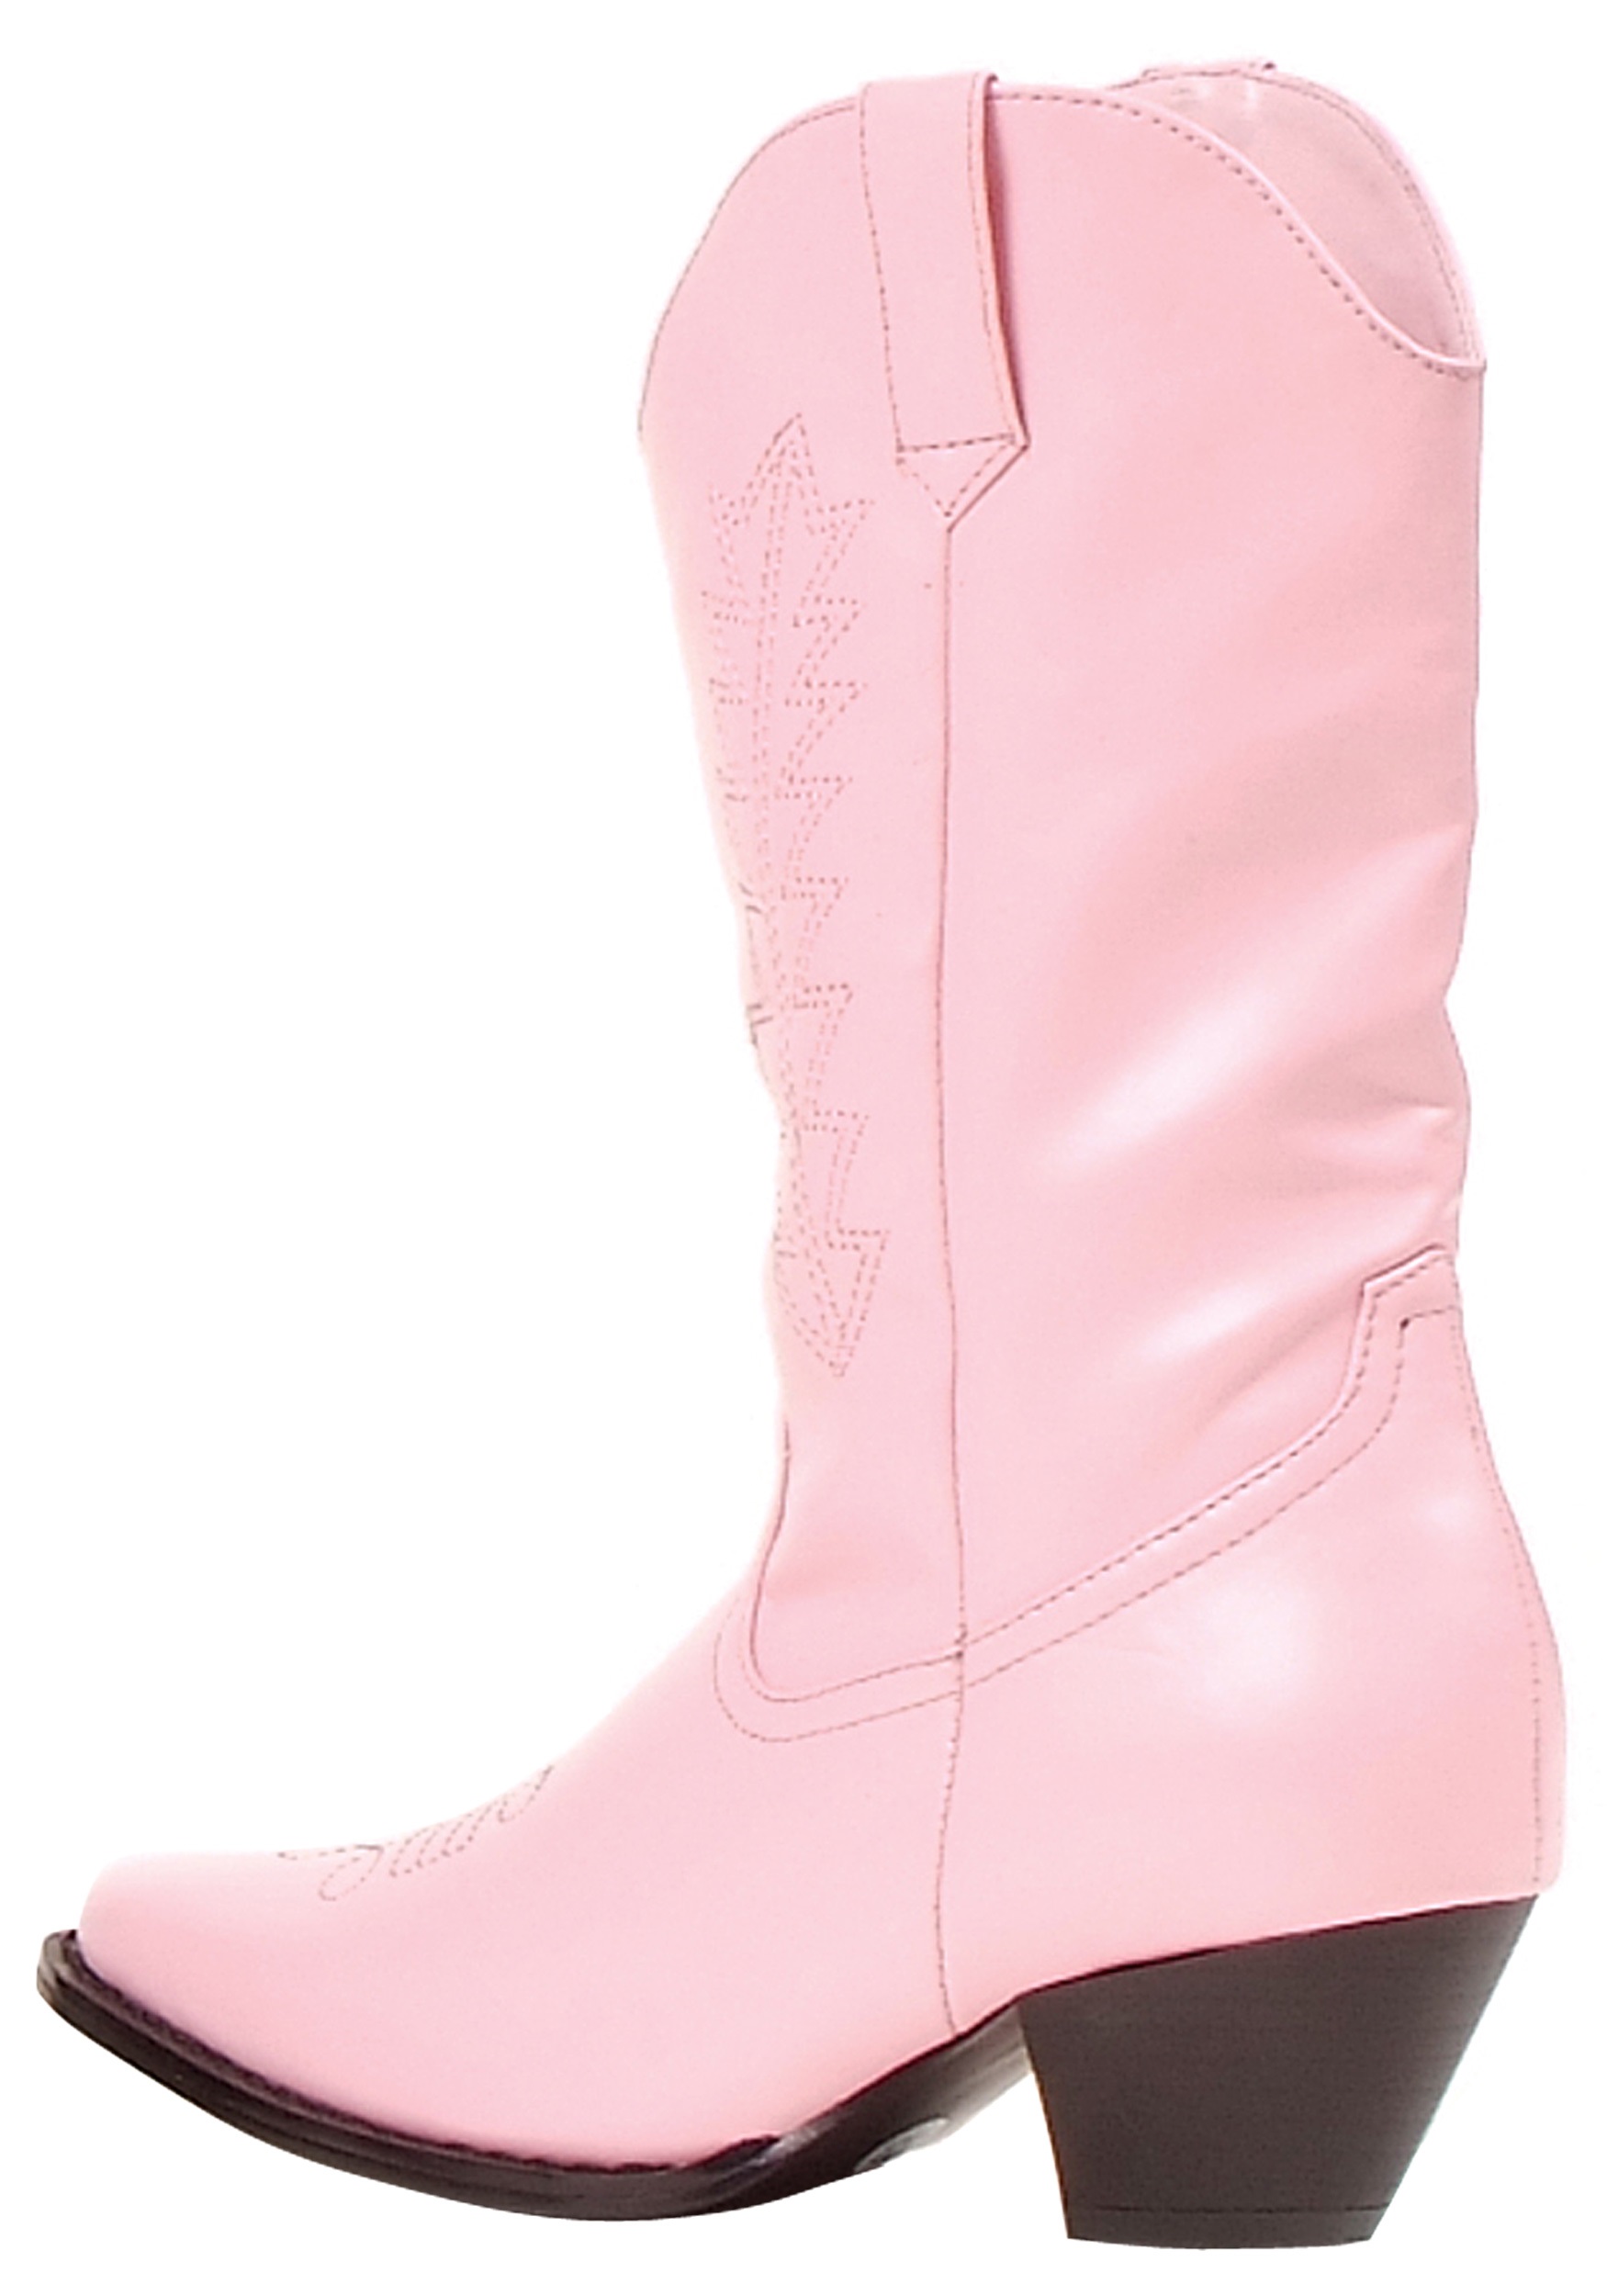 Pink Cowboy Boots girls pink cowgirl boots OQJUVTZ